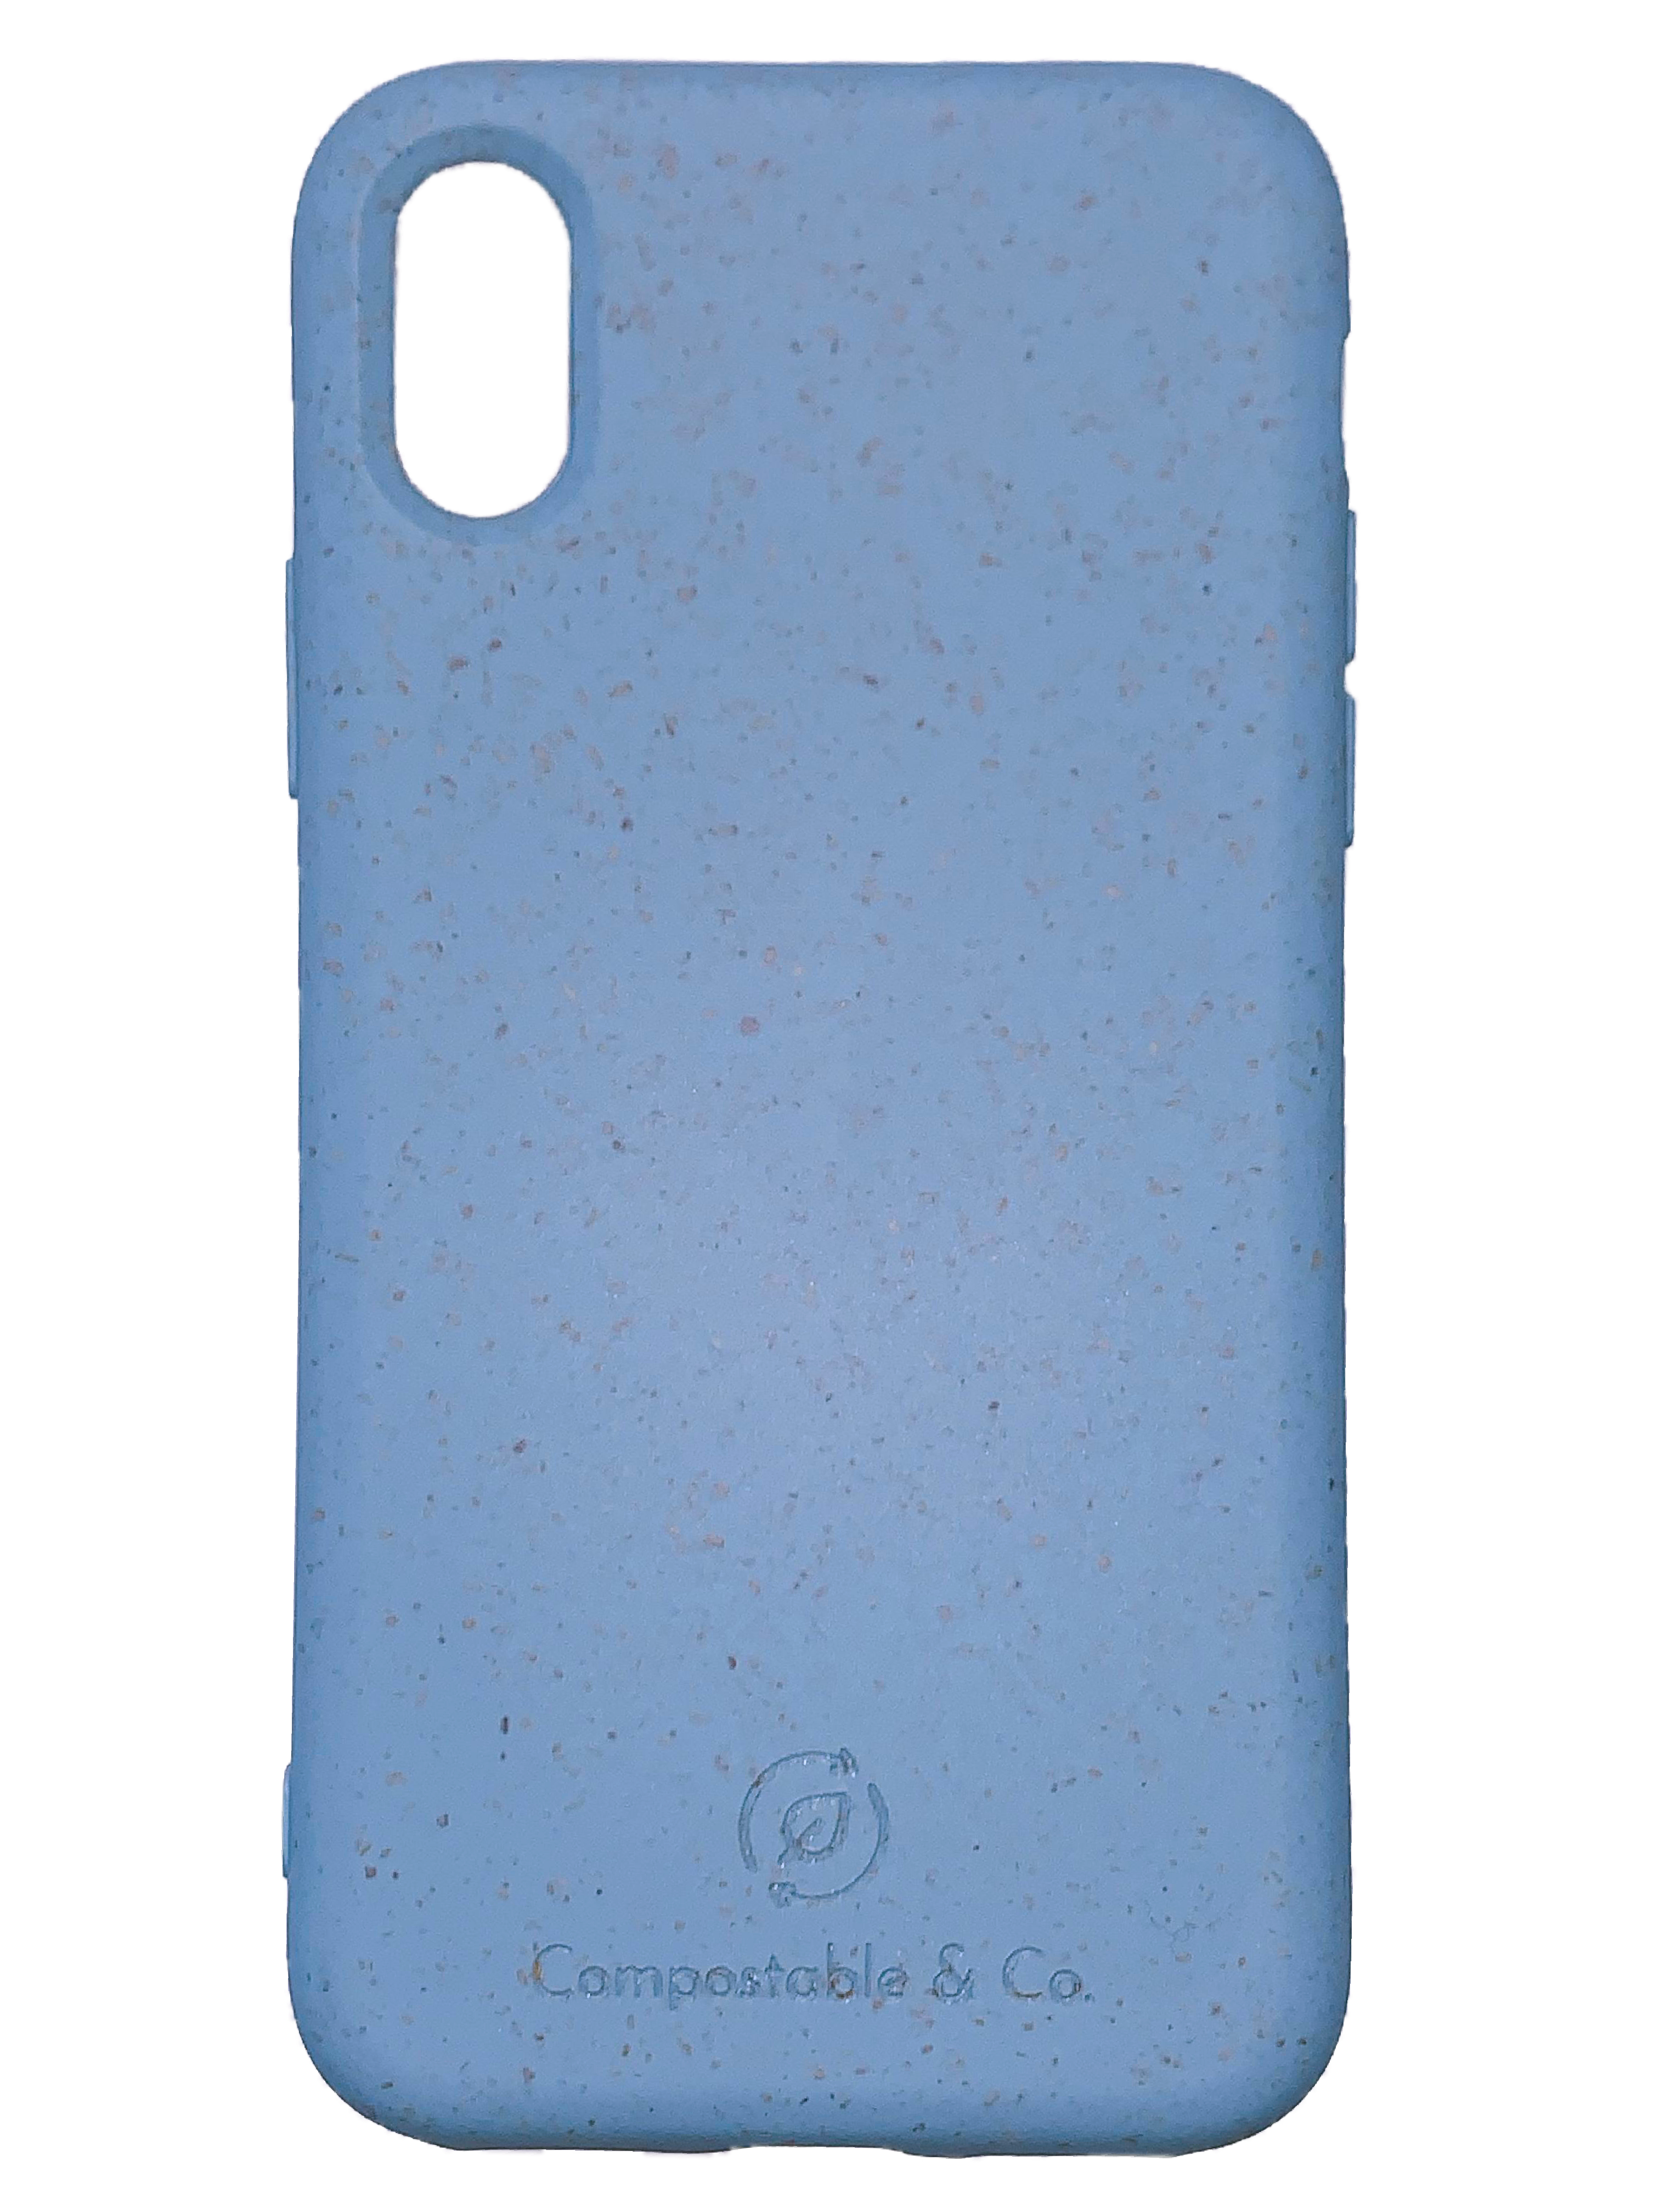 Compostable & Co. iPhone x / xs blue biodegradable phone case